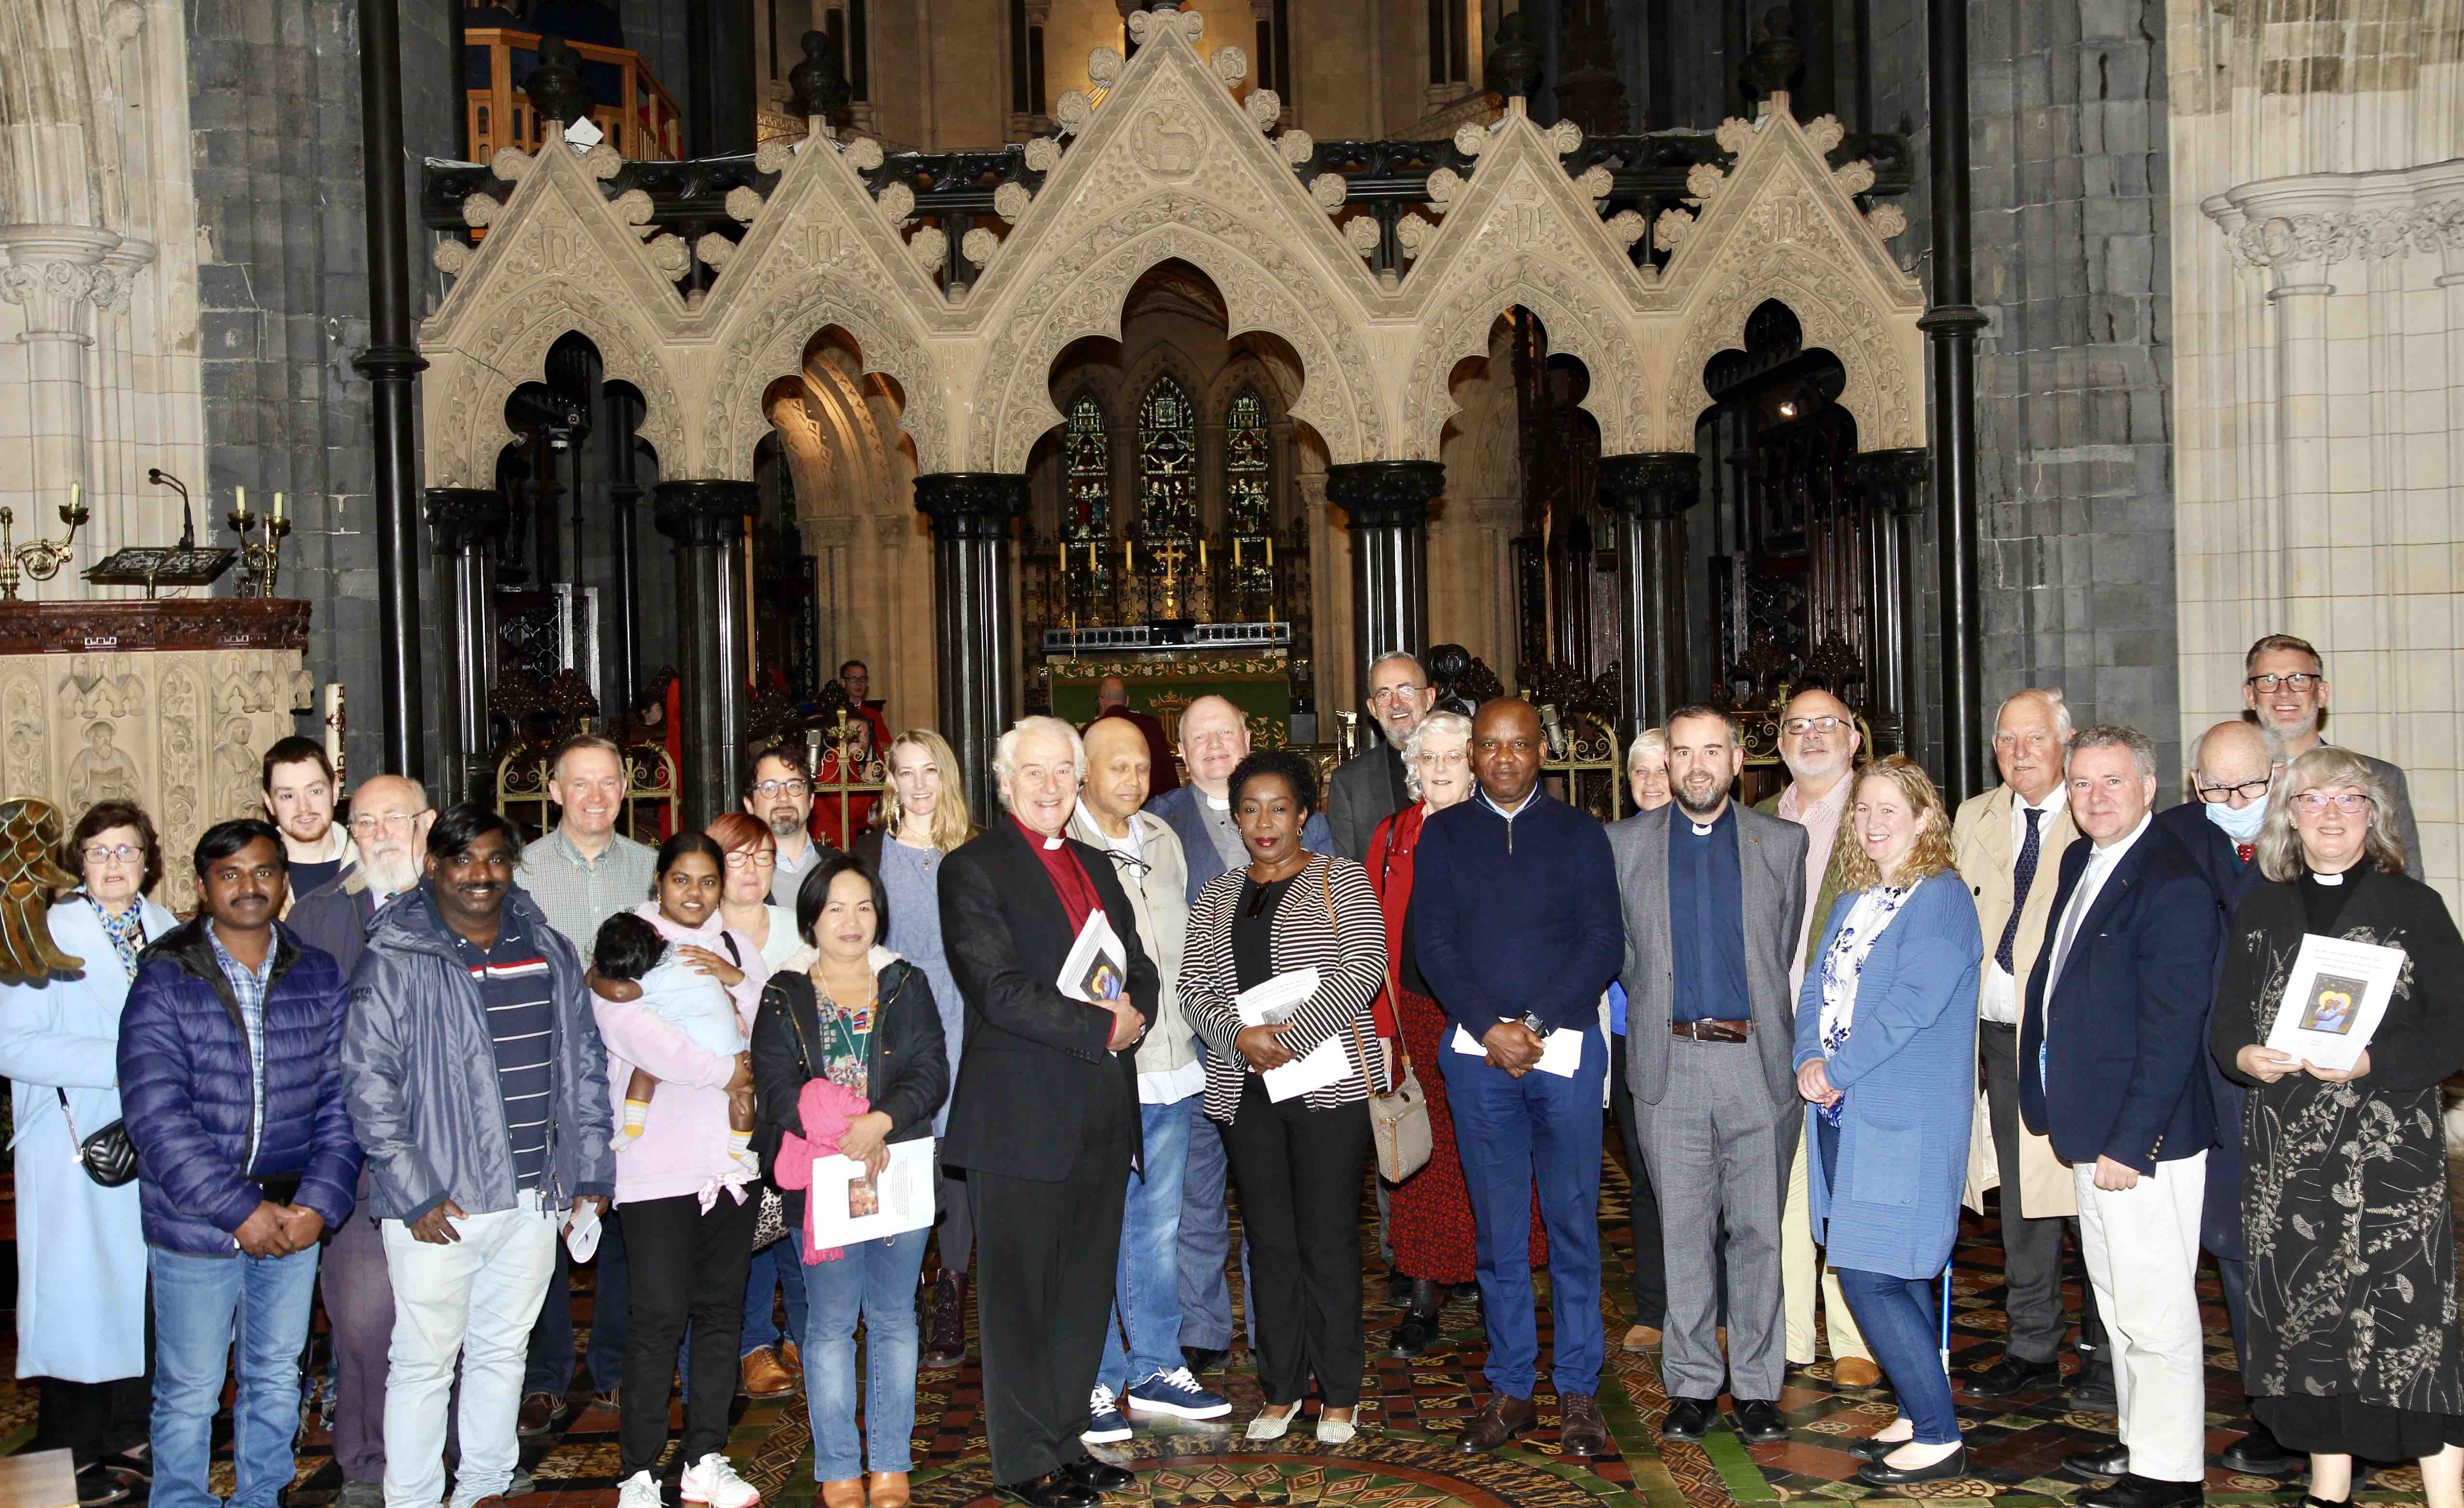 Some of those attending the launch of ‘The Lord Looks on the Heart' in Christ Church Cathedral. Others joined online.